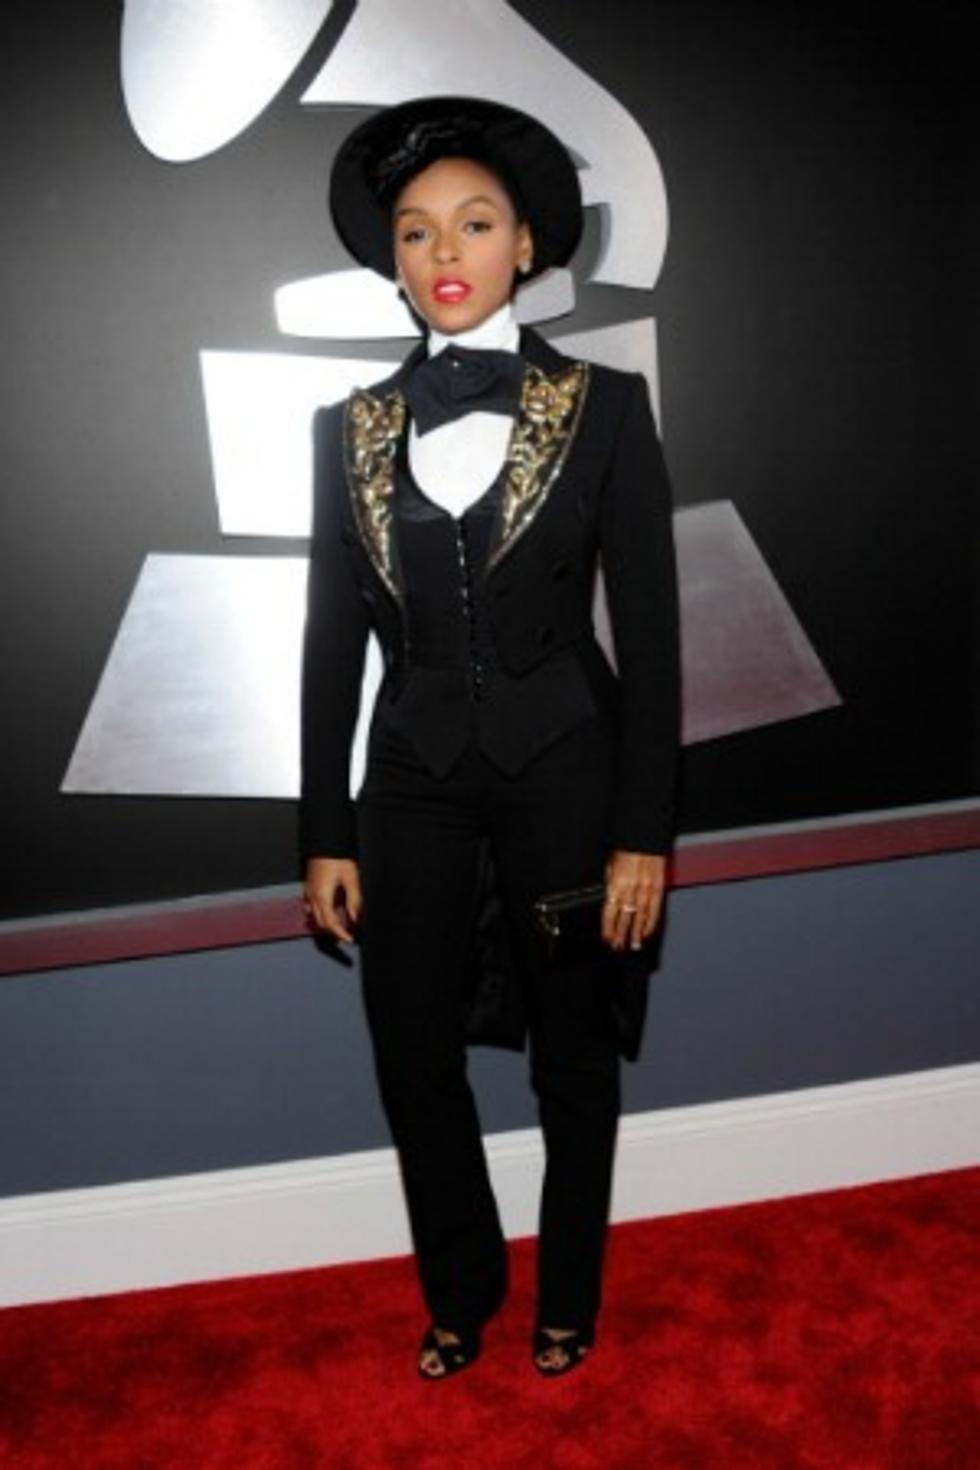 Janelle Monae Suits Up for 2013 Grammy Awards Red Carpet